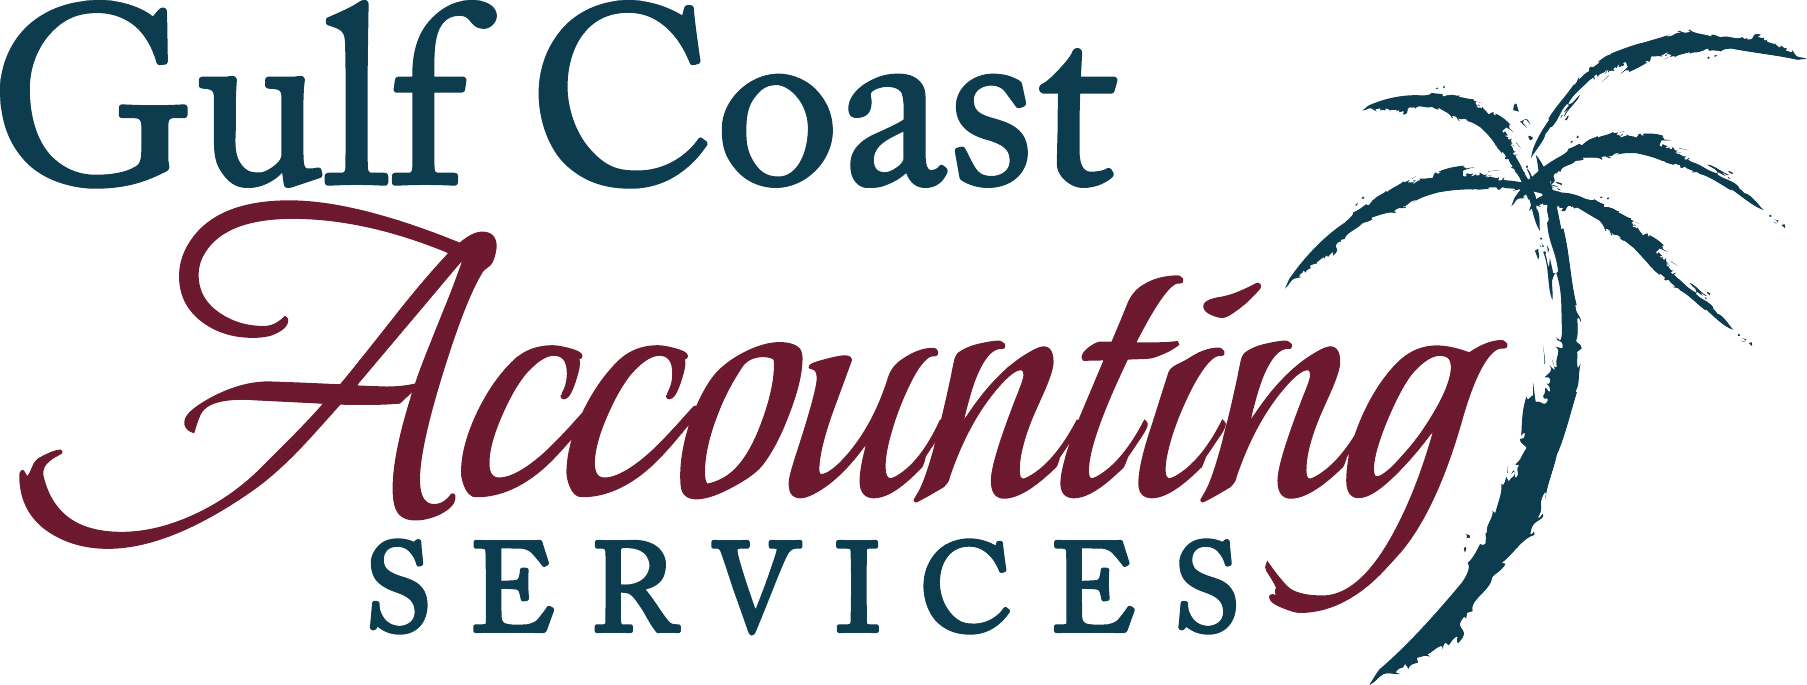 Gulf Coast Accounting Services